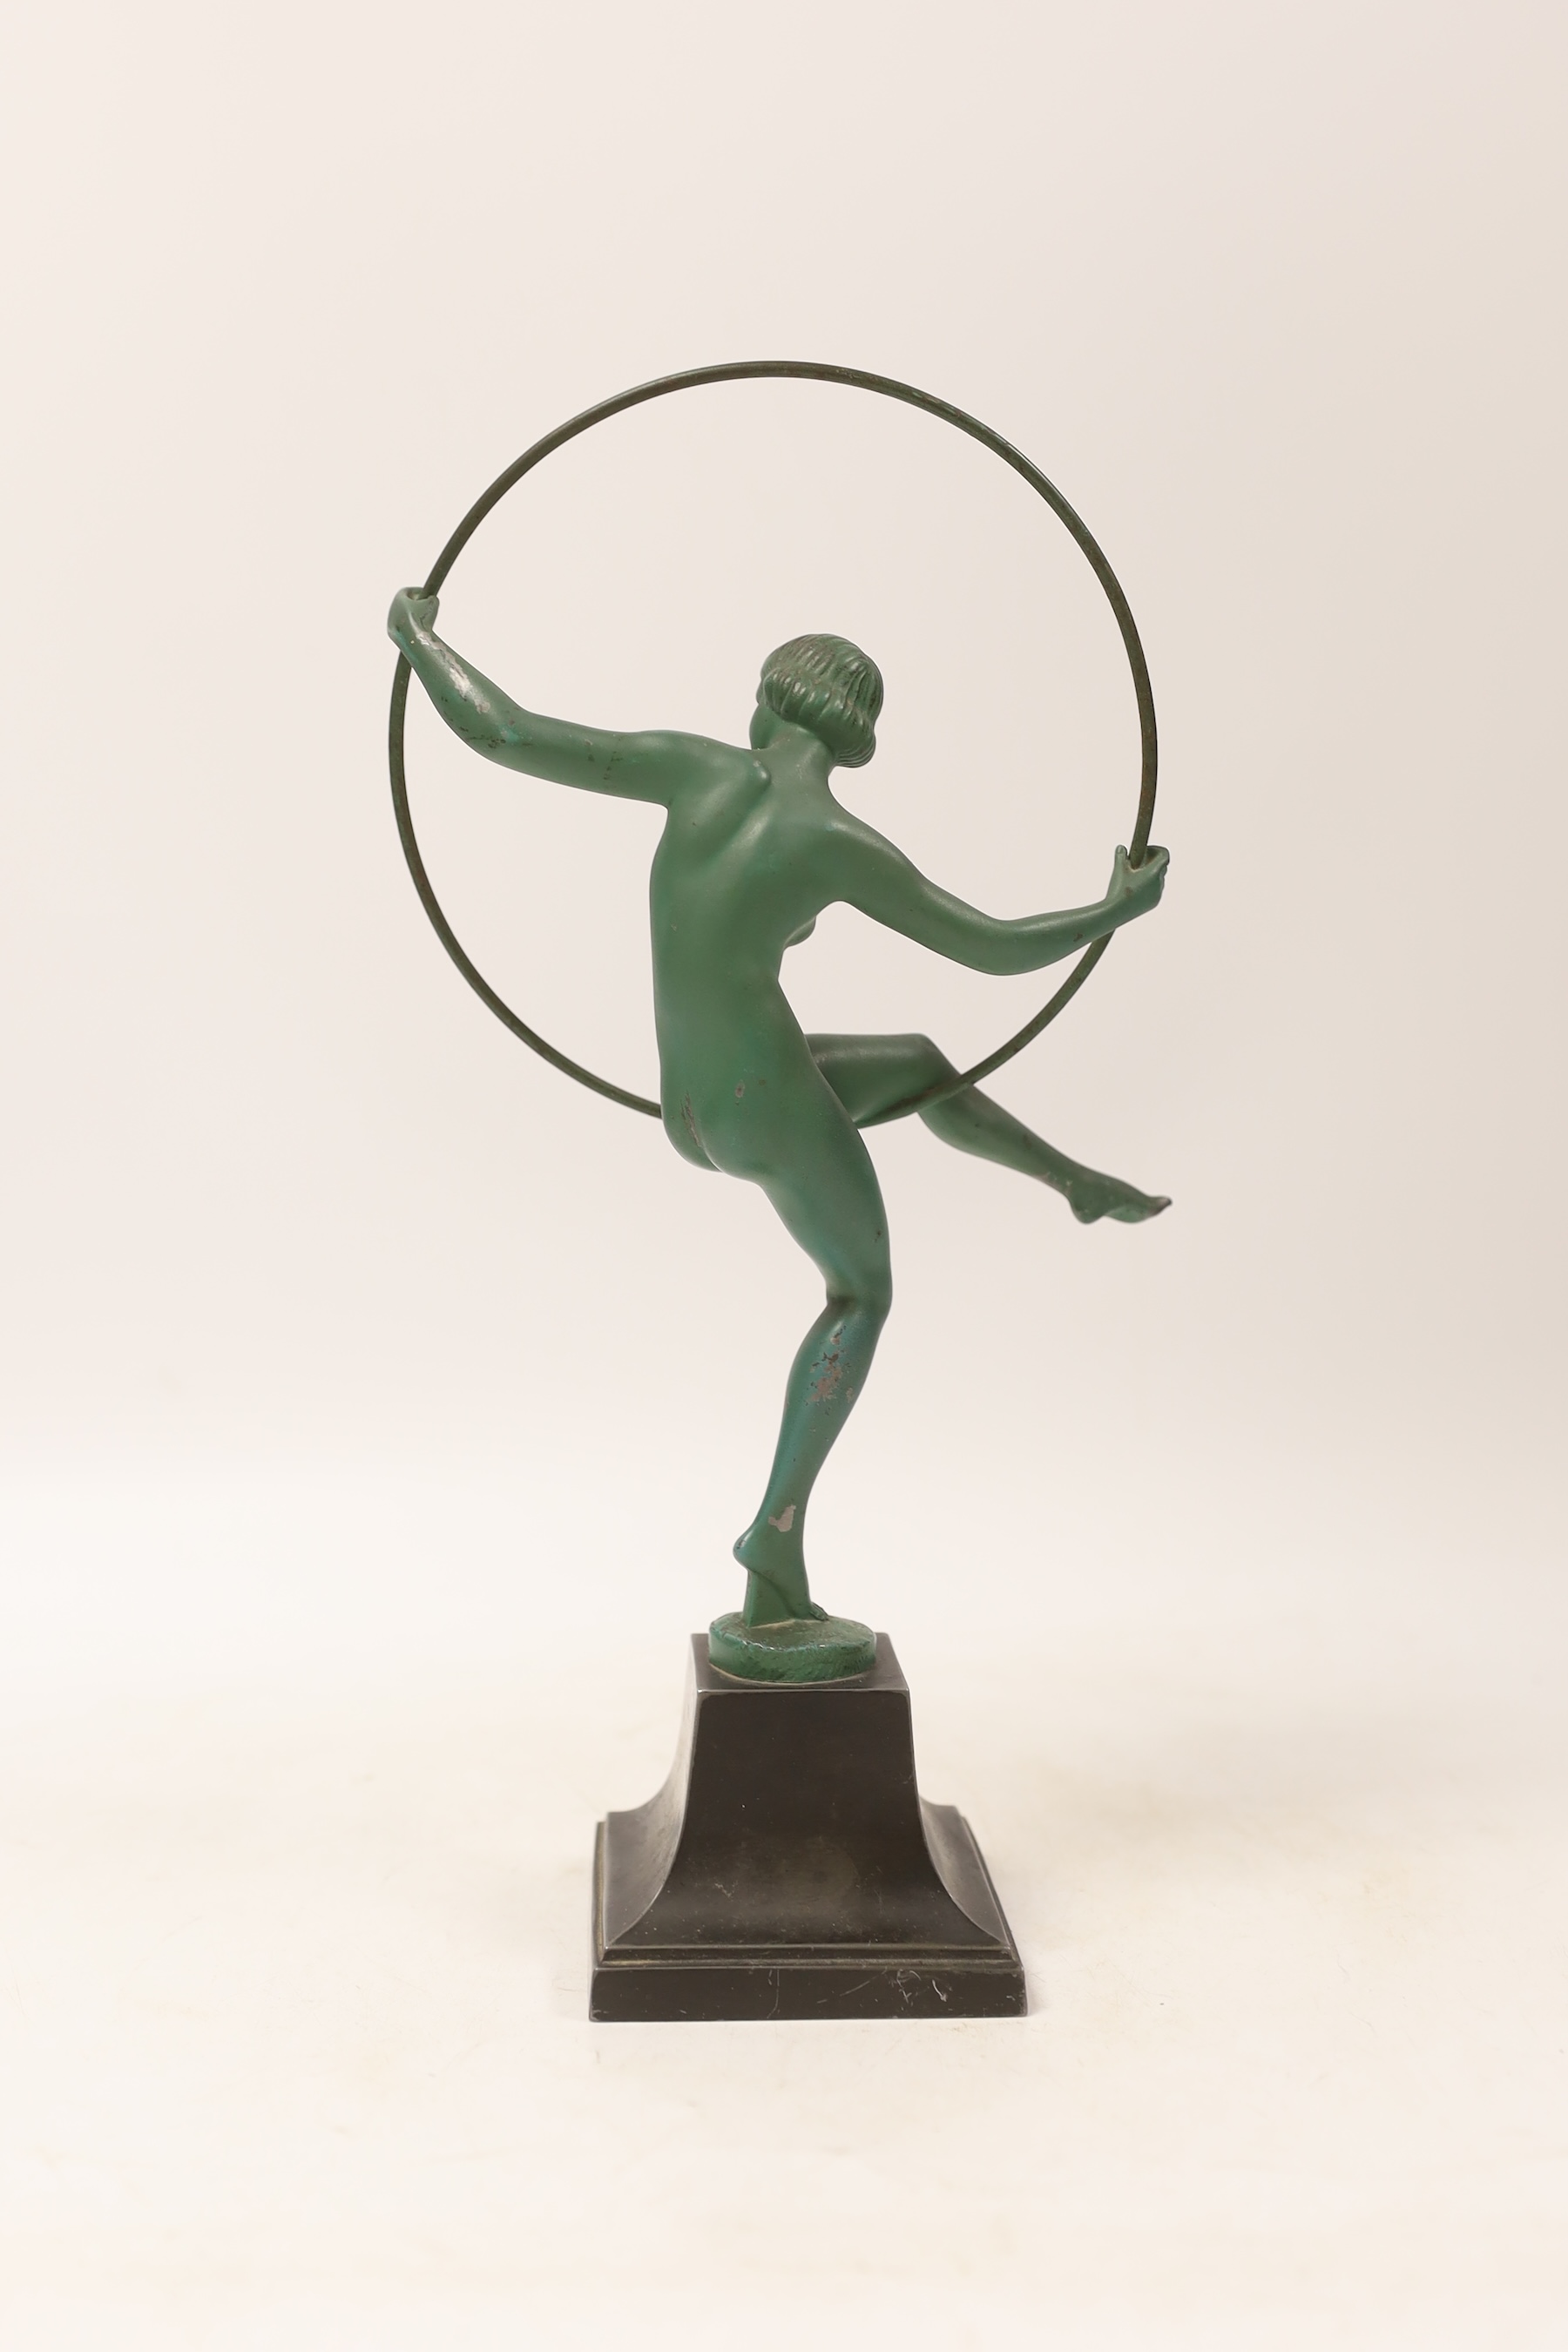 An Art Deco spelter model of a hoop dancer, signed Briand, 29cm. Condition - fair to good